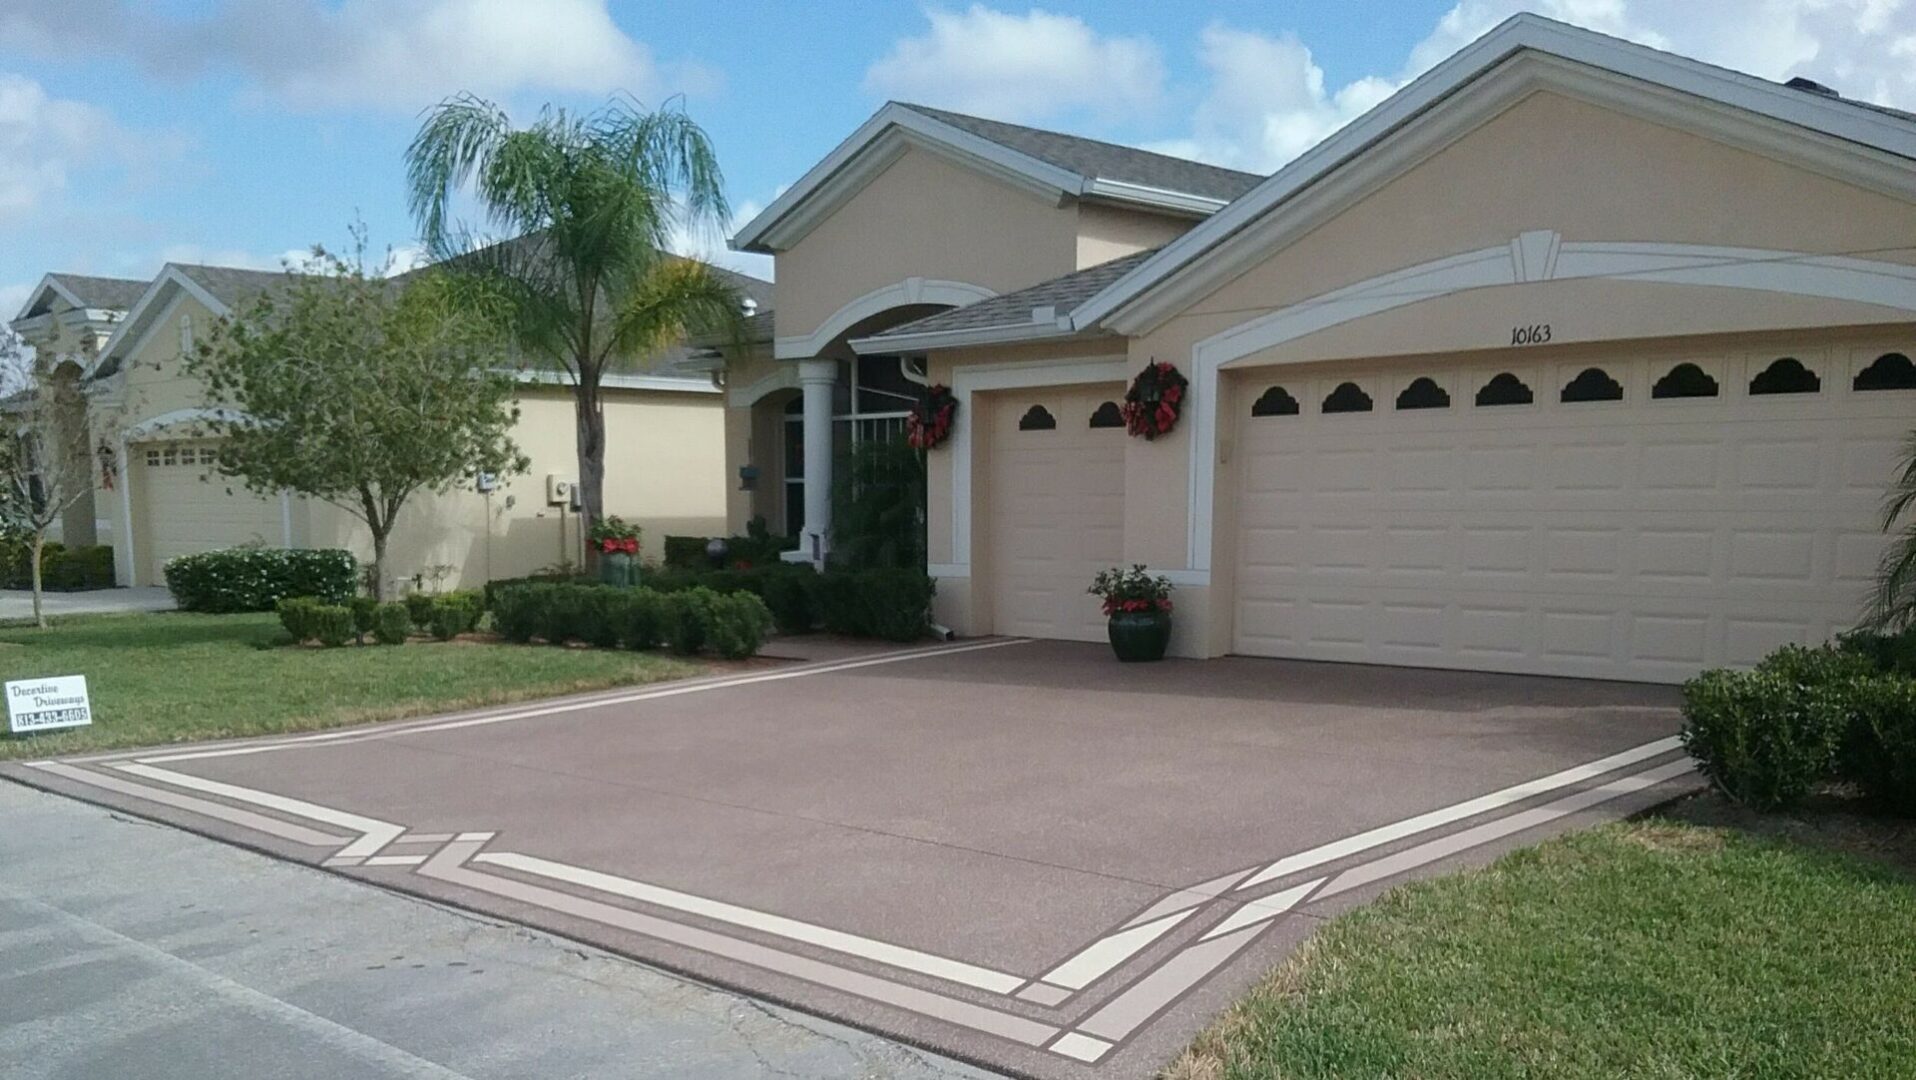 painted driveway with double border